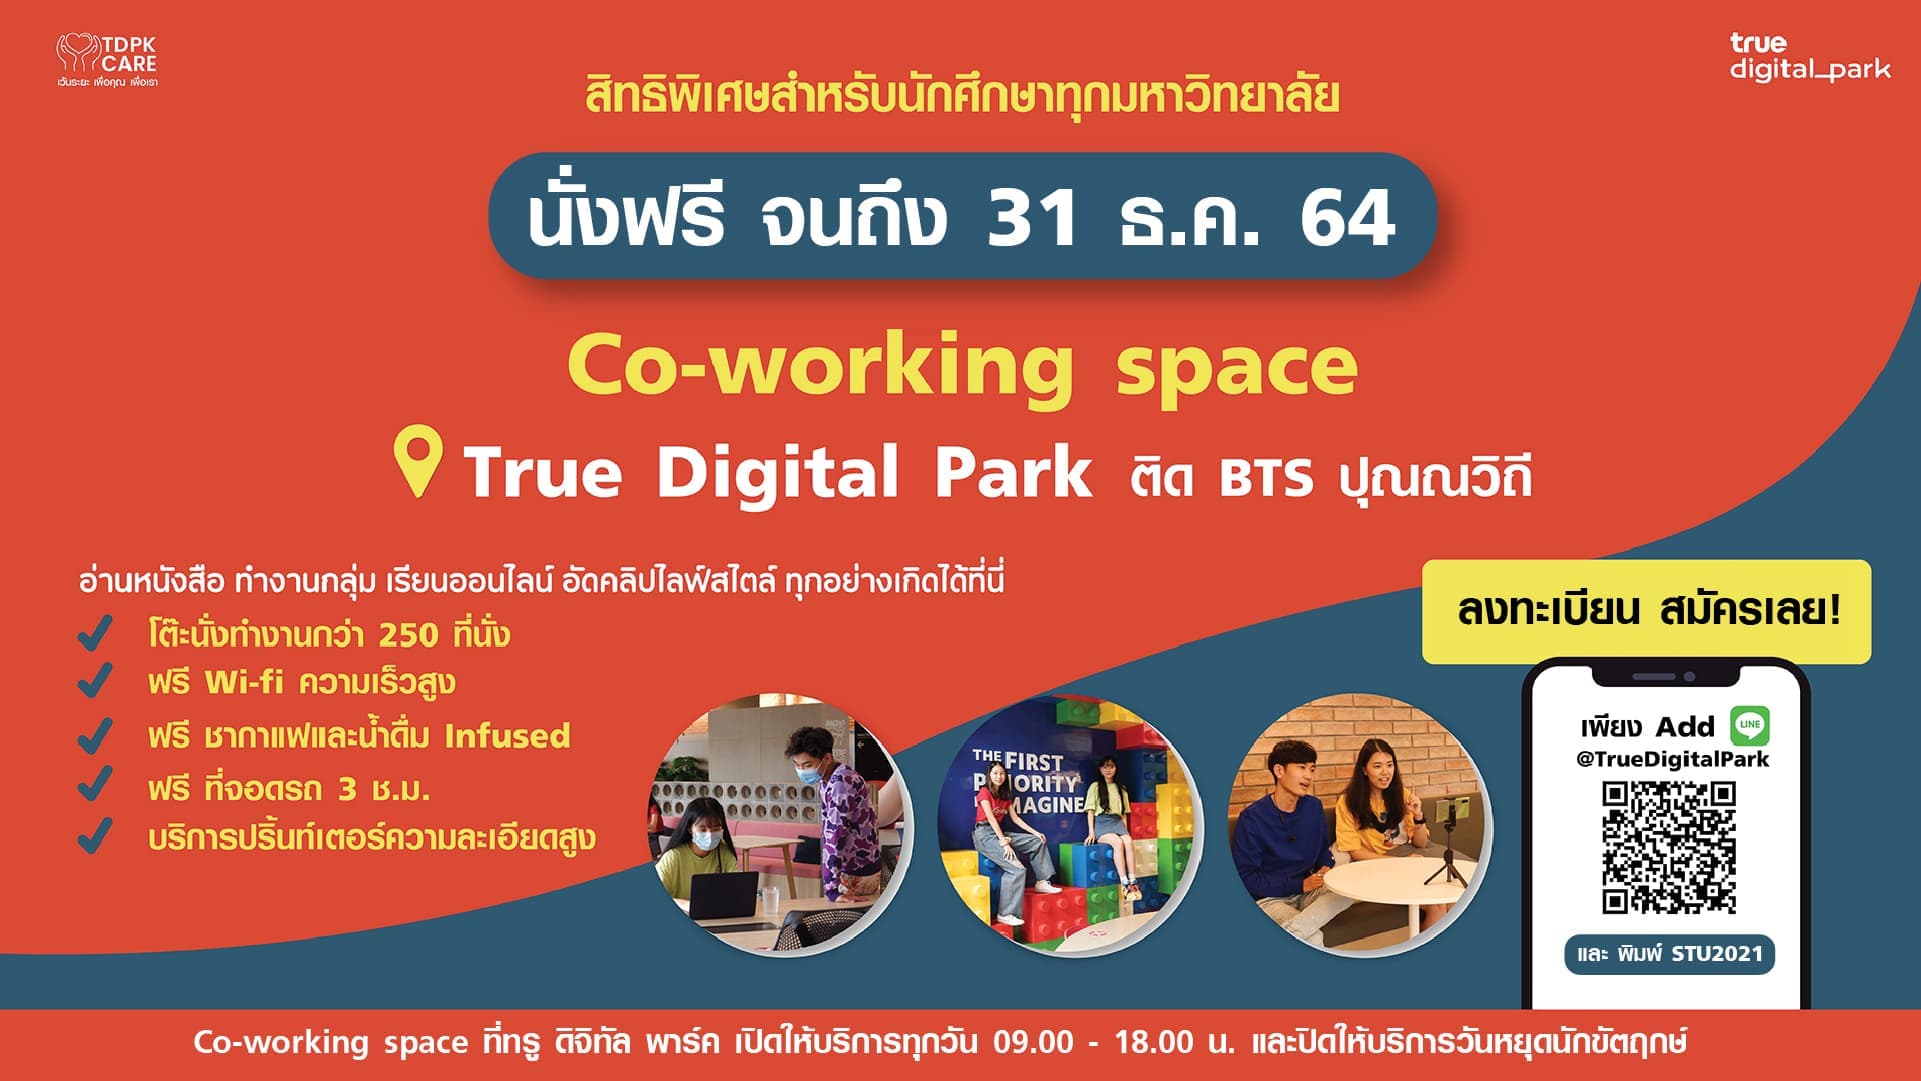 True Digital Park invites college students to use co-working space for free